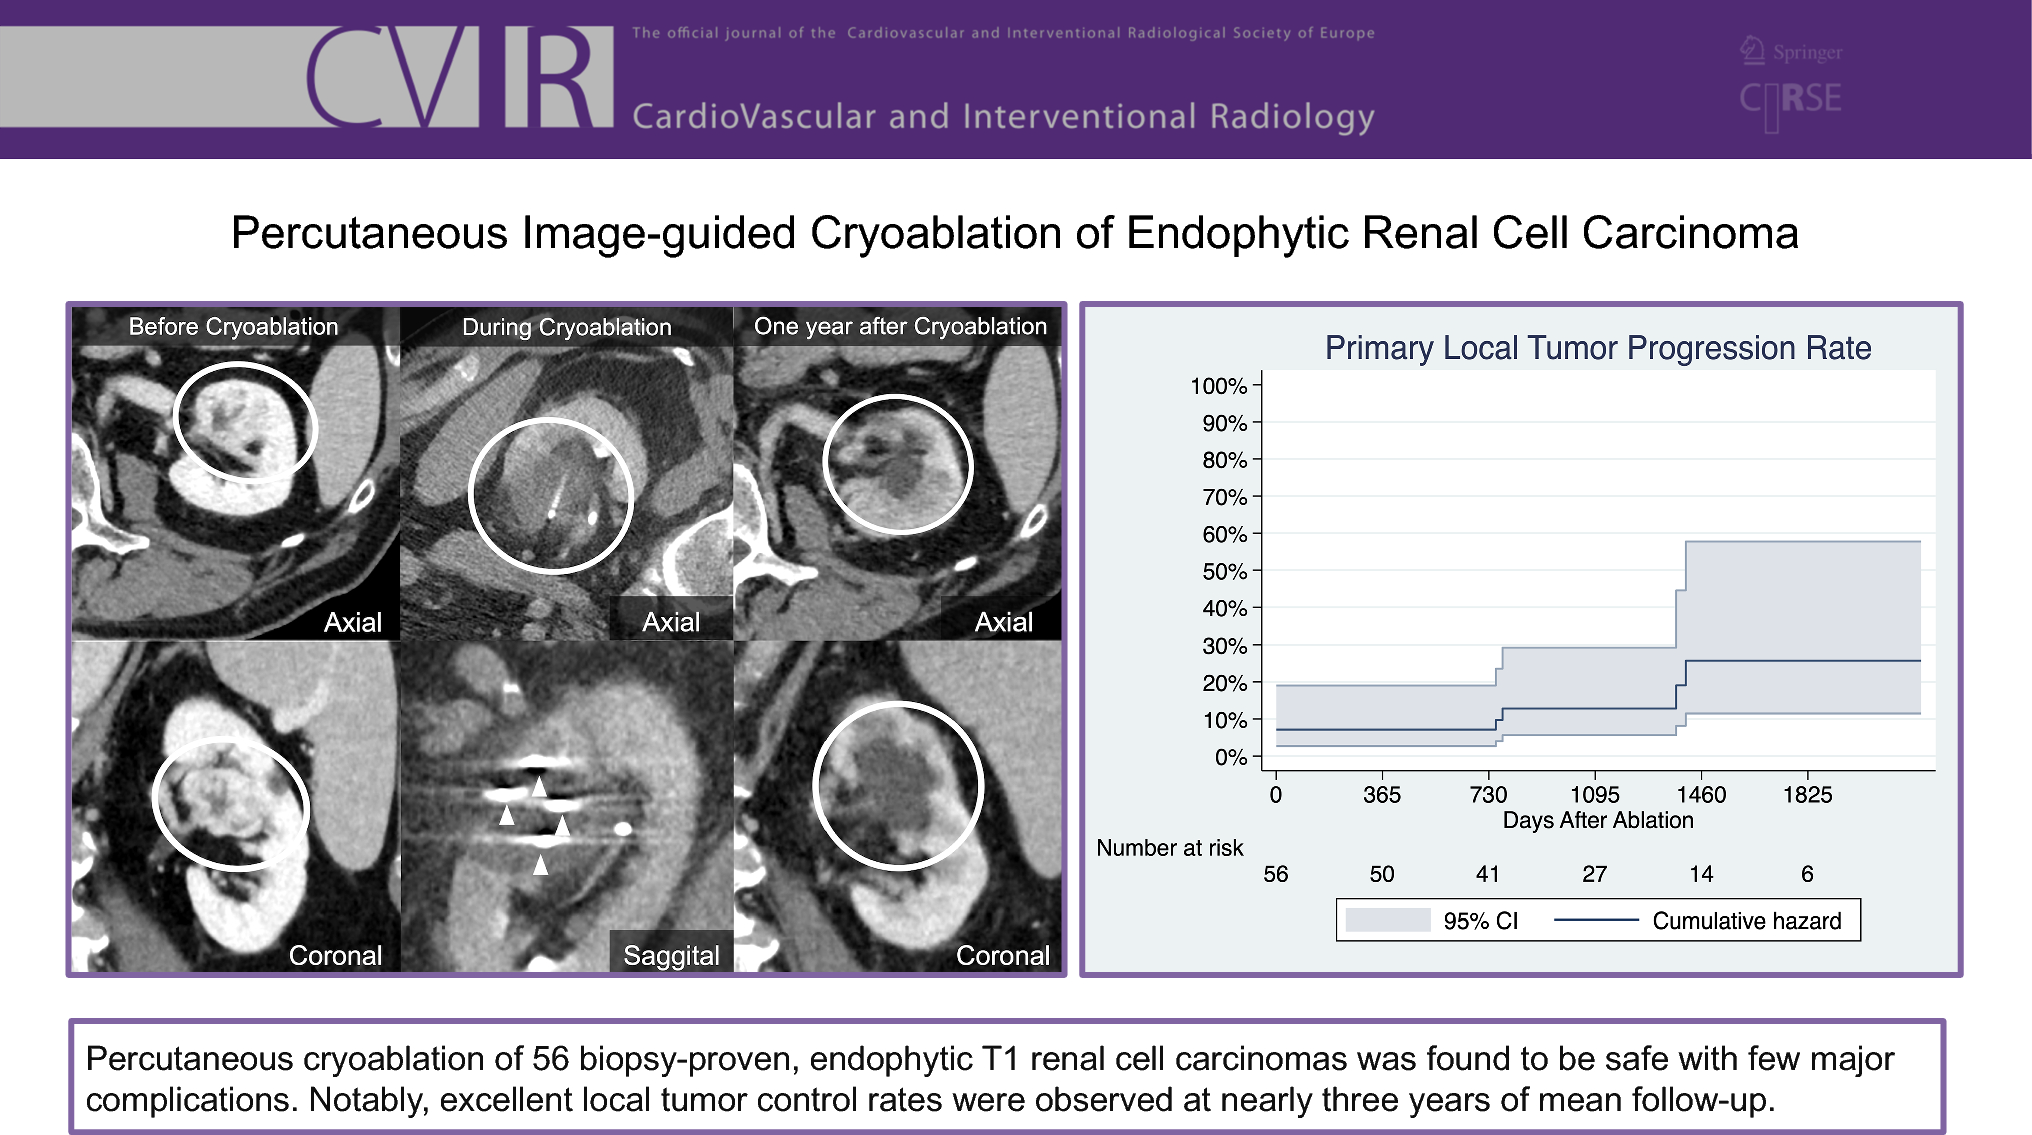 Percutaneous Image-Guided Cryoablation of Endophytic Renal Cell Carcinoma